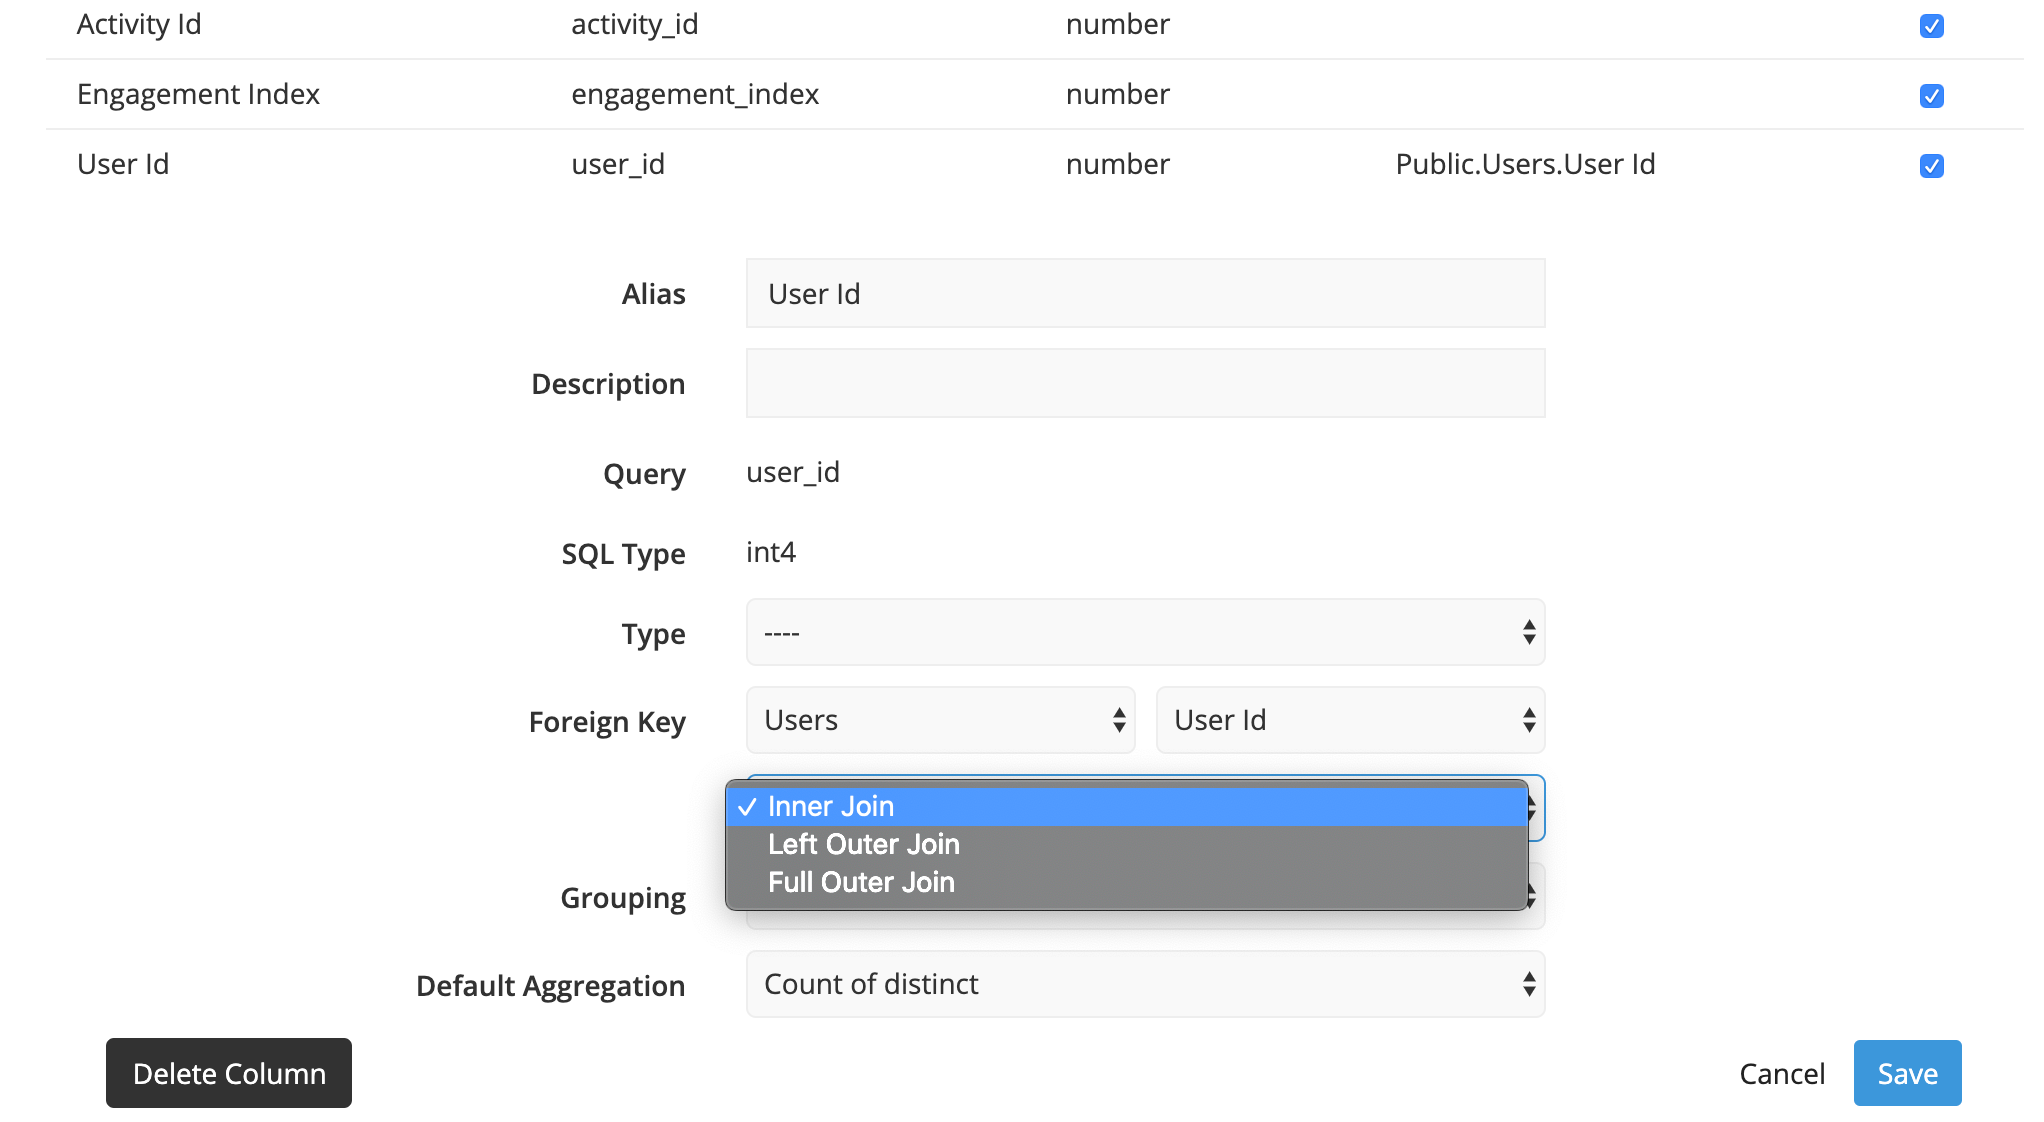 Set up the foreign key - choose the User Id from the Users table